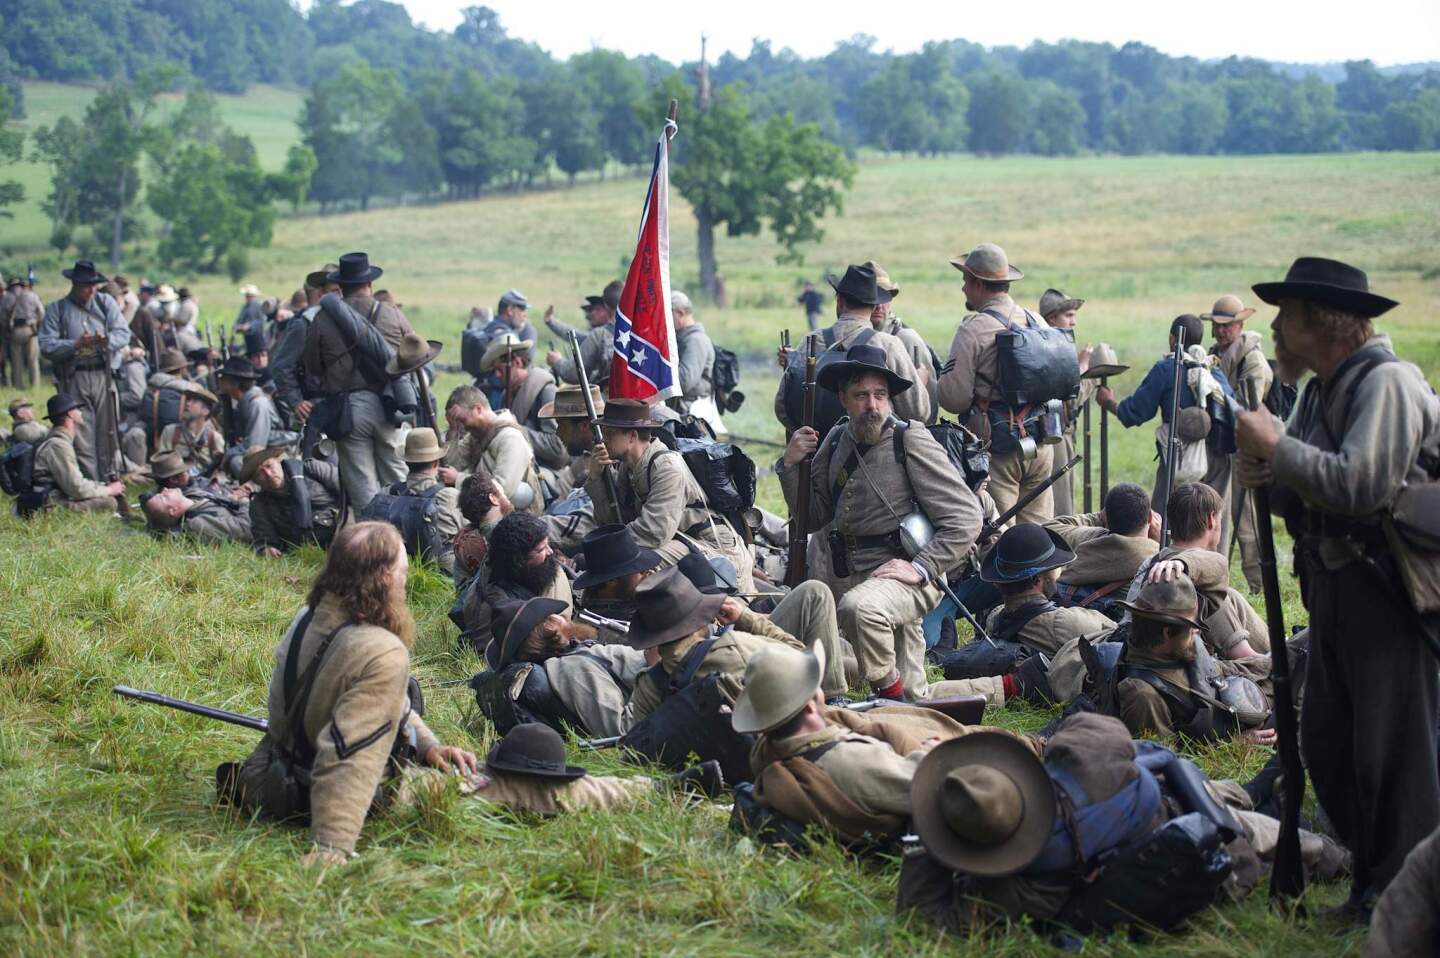 Actors playing Confederate soldiers congregate at a wood's edge awaiting orders to charge during a reenactment of The Battle of Little Roundtop during the Blue Gray Alliance events marking the 150th anniversary of the Battle of Gettysburg, in Gettysburg, Pennsylvania June 30, 2013. The Battle of Gettysburg was fought July 1-3, 1863, in and near the town of Gettysburg, Pennsylvania and was the battle with the highest number of casualties in the Civil War. The Union army defeated a force led by Confederate General Robert E. Lee in what is often described as the turning point of the war. REUTERS/Mark Makela (UNITED STATES - Tags: ANNIVERSARY SOCIETY CONFLICT) ORG XMIT: MM01